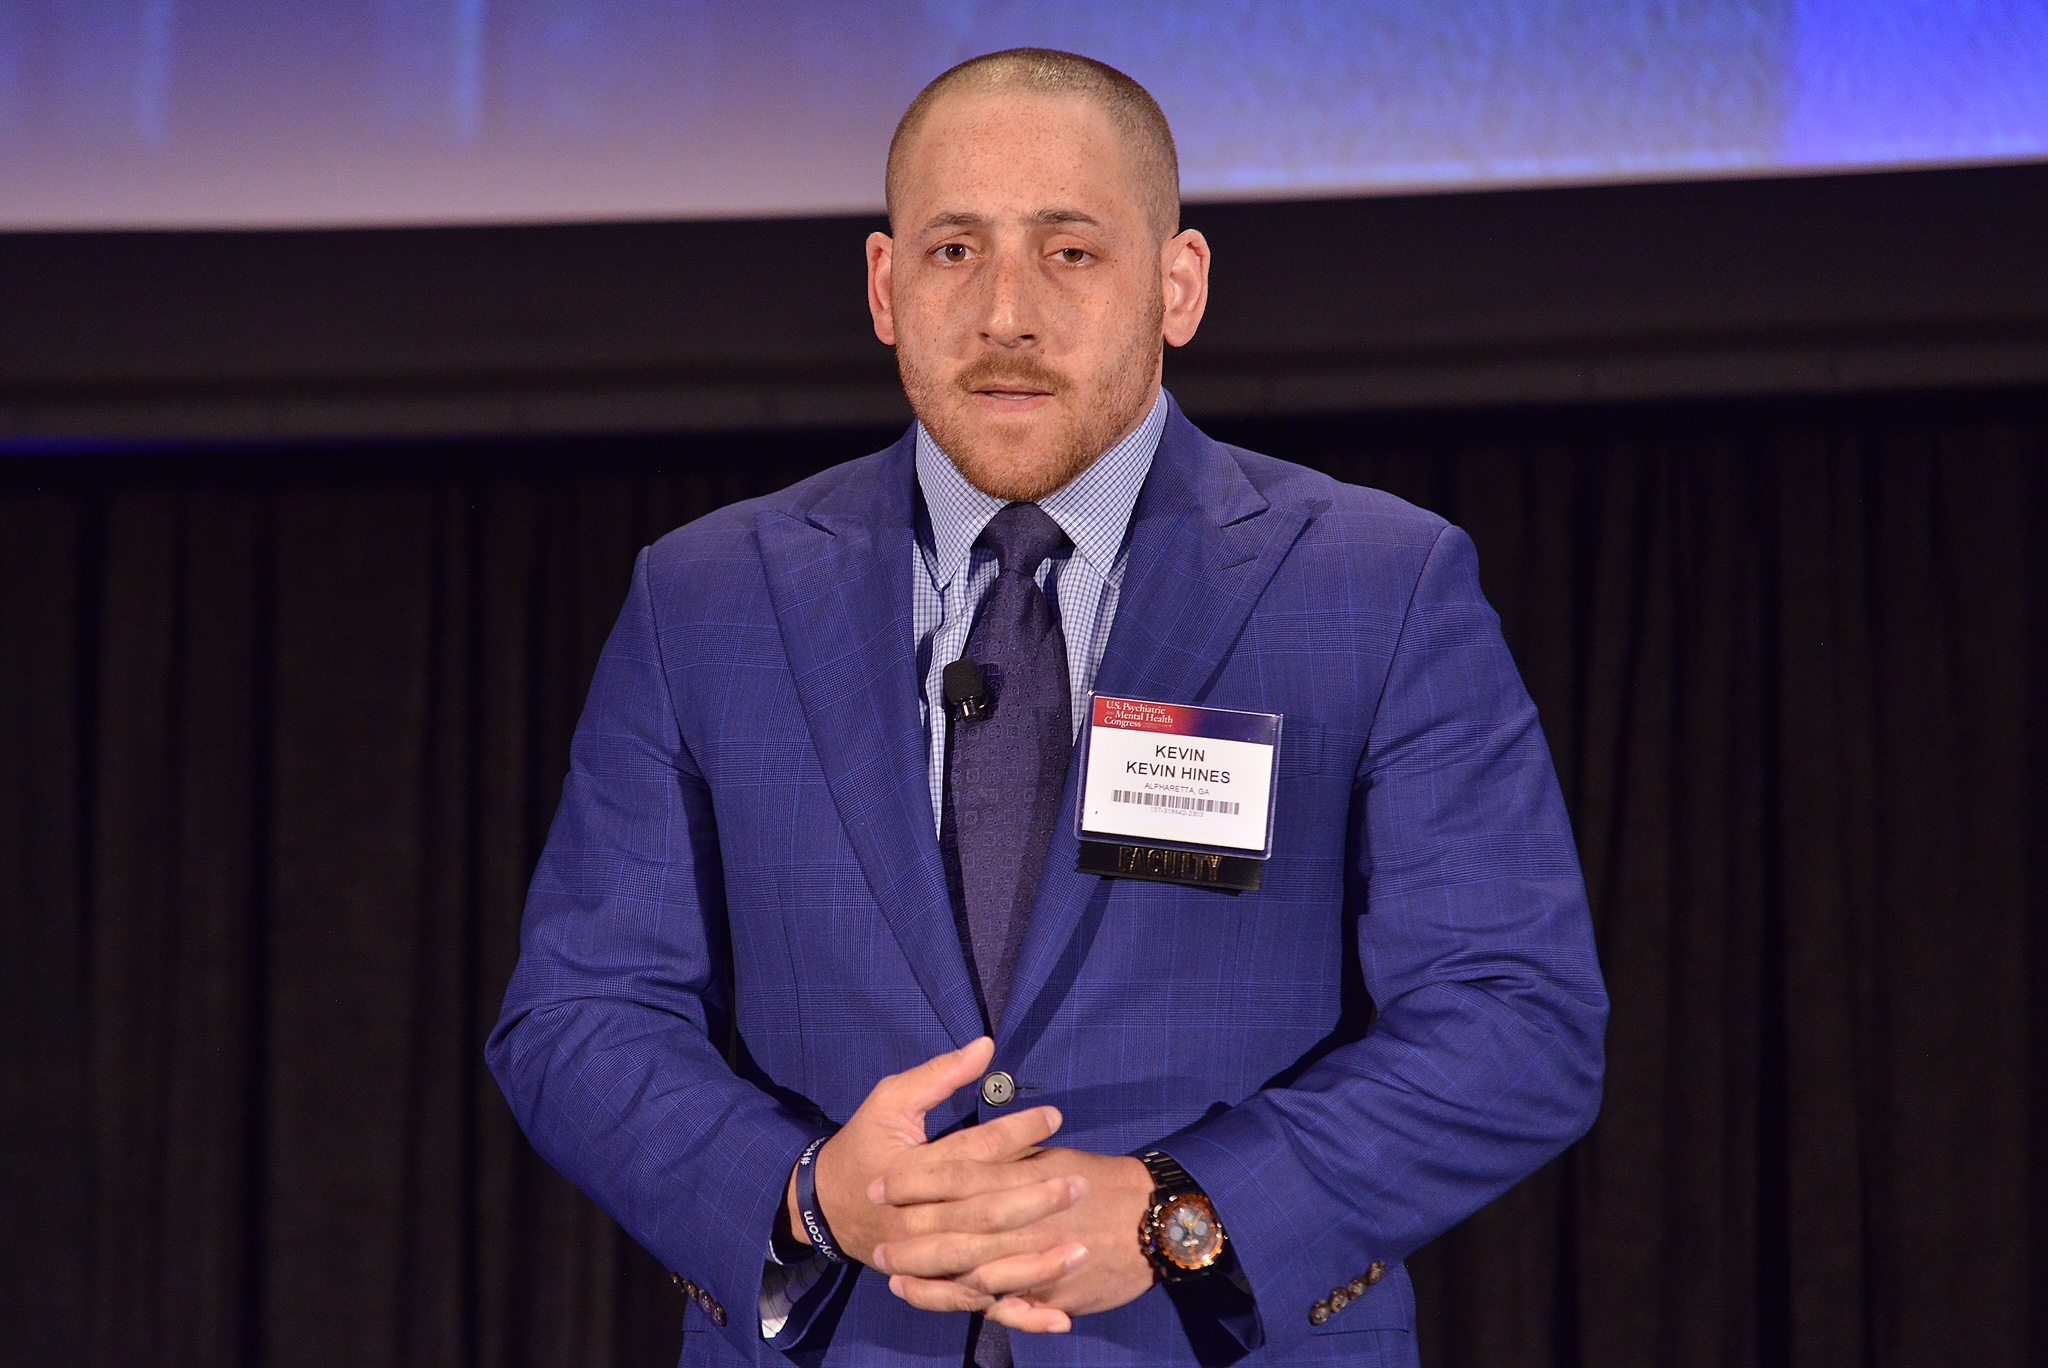 Suicide Prevention Advocate Kevin Hines Speaks at Psych Congress